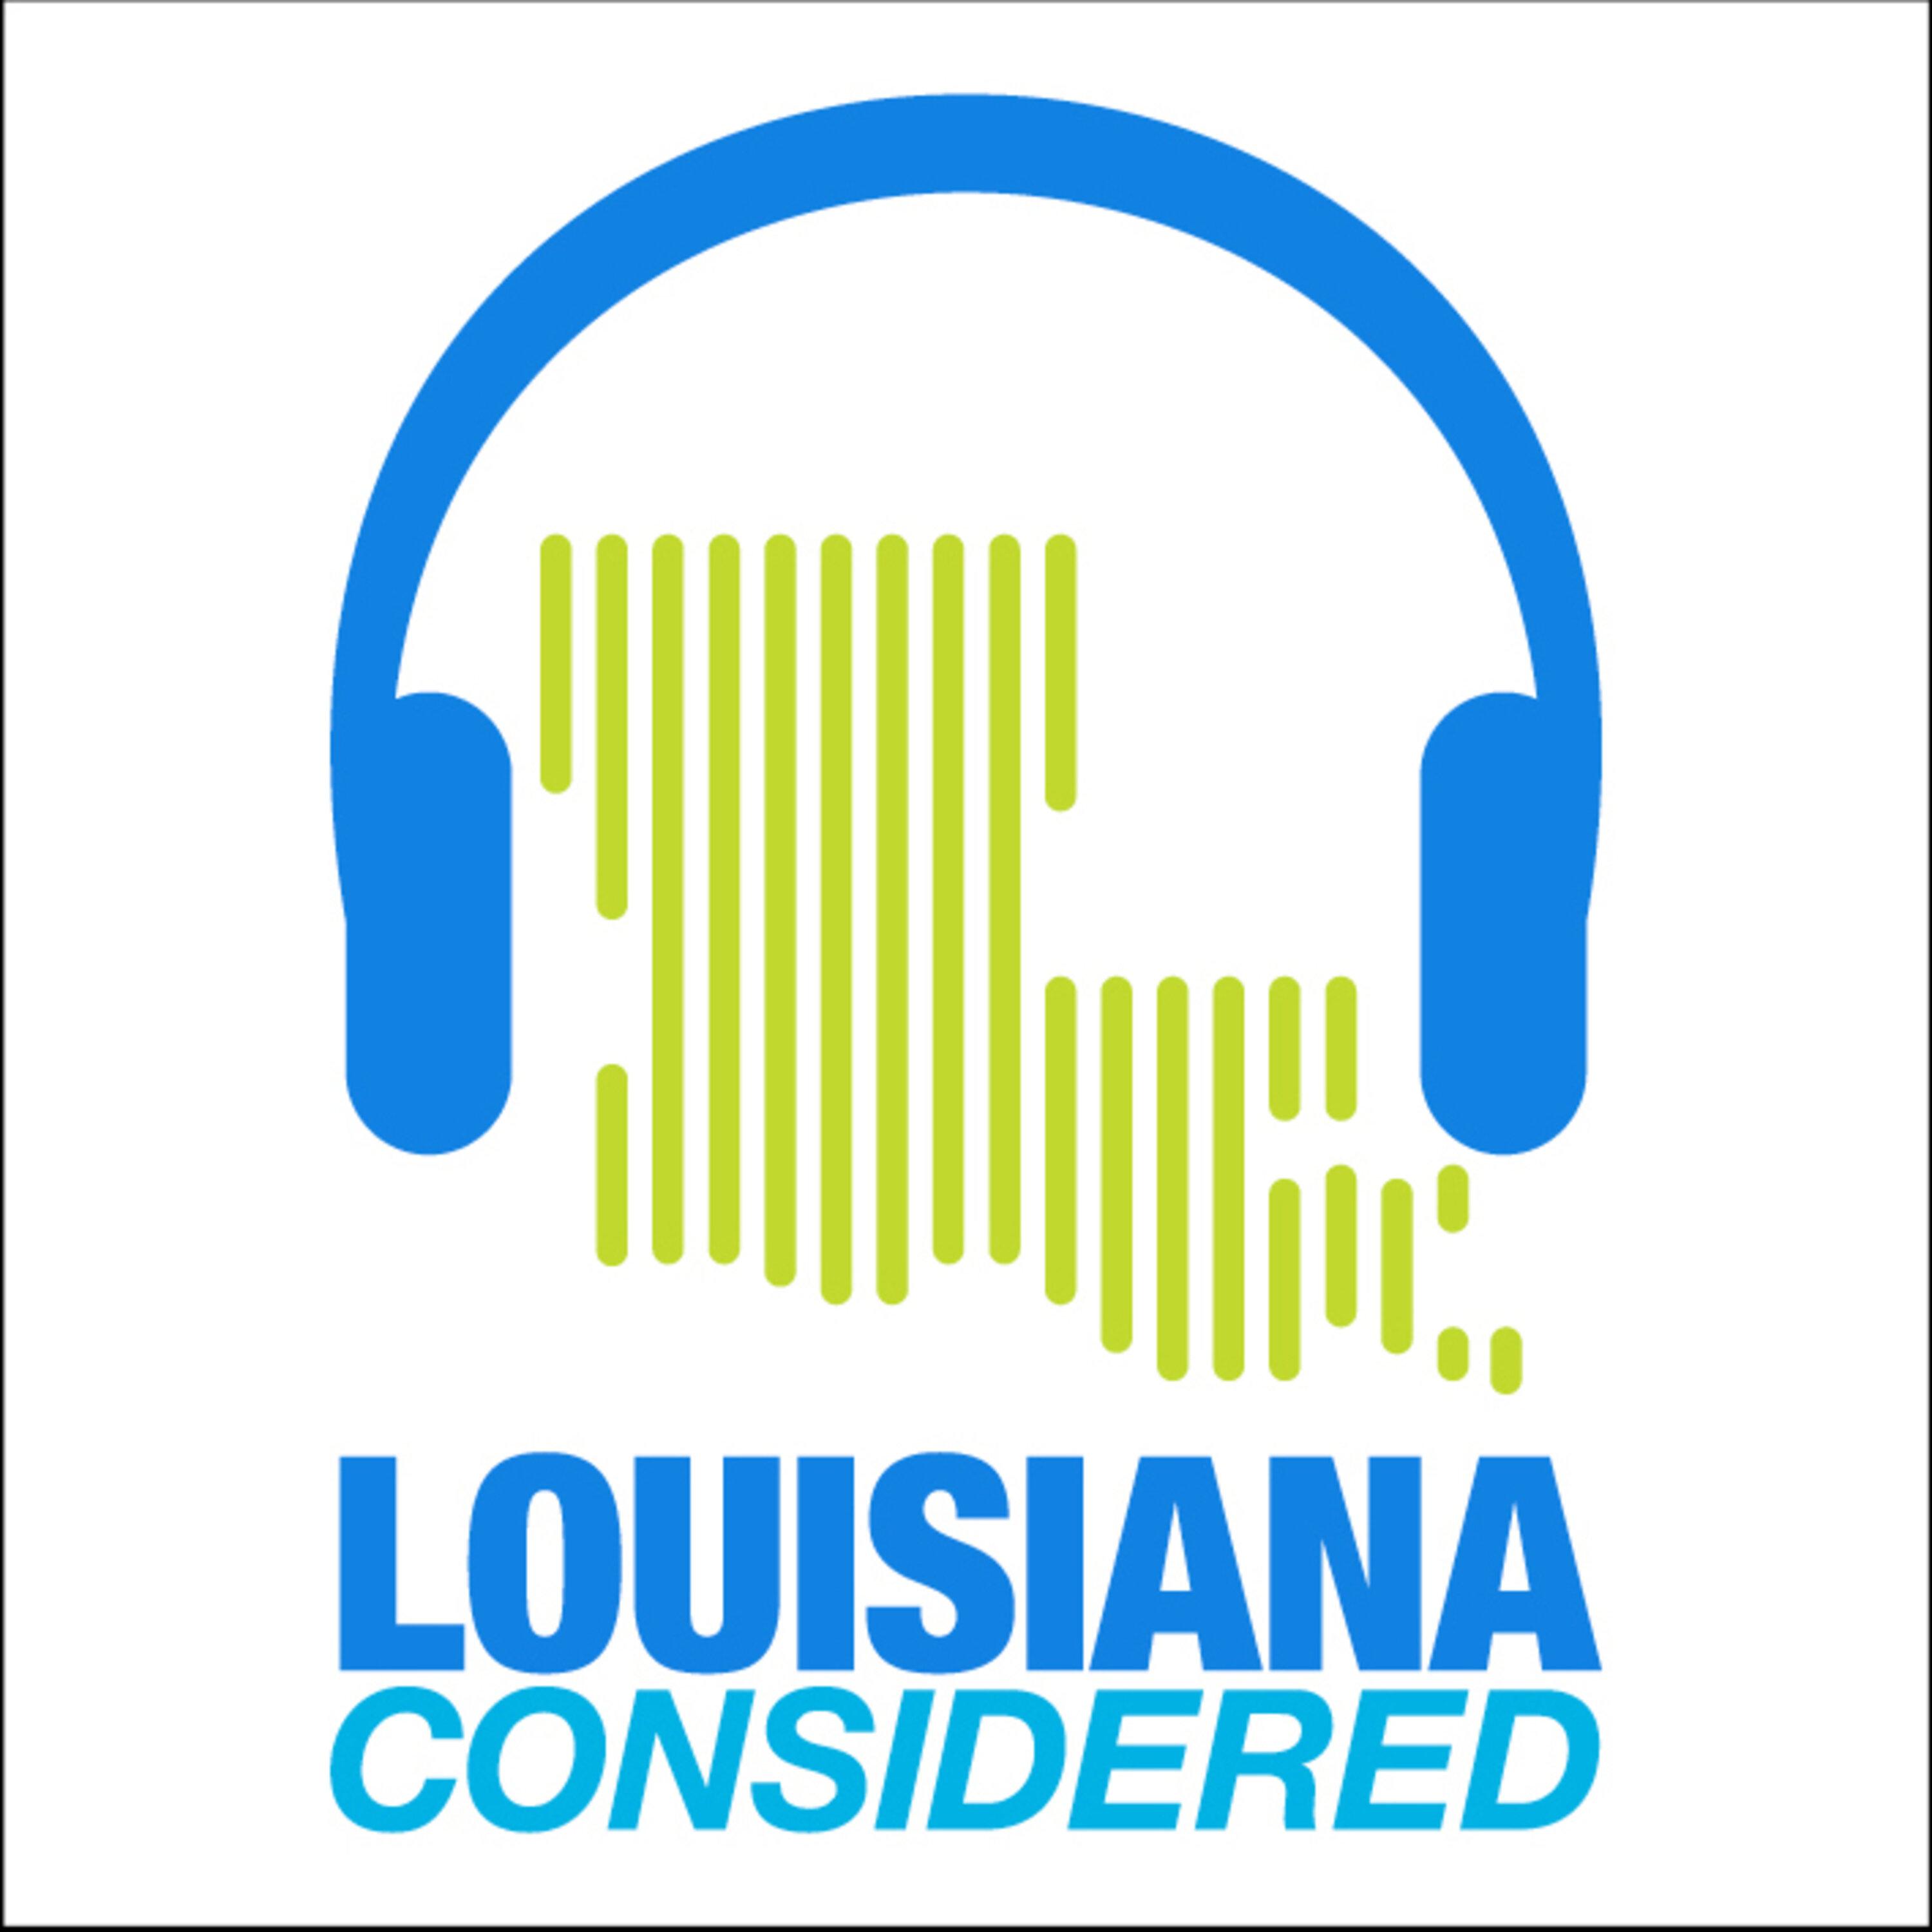 Thumbnail for "Louisiana Considered: Perspectives On Changes To Louisiana Unemployment Insurance Payments, WRKF’s New Radio Theatre Program".